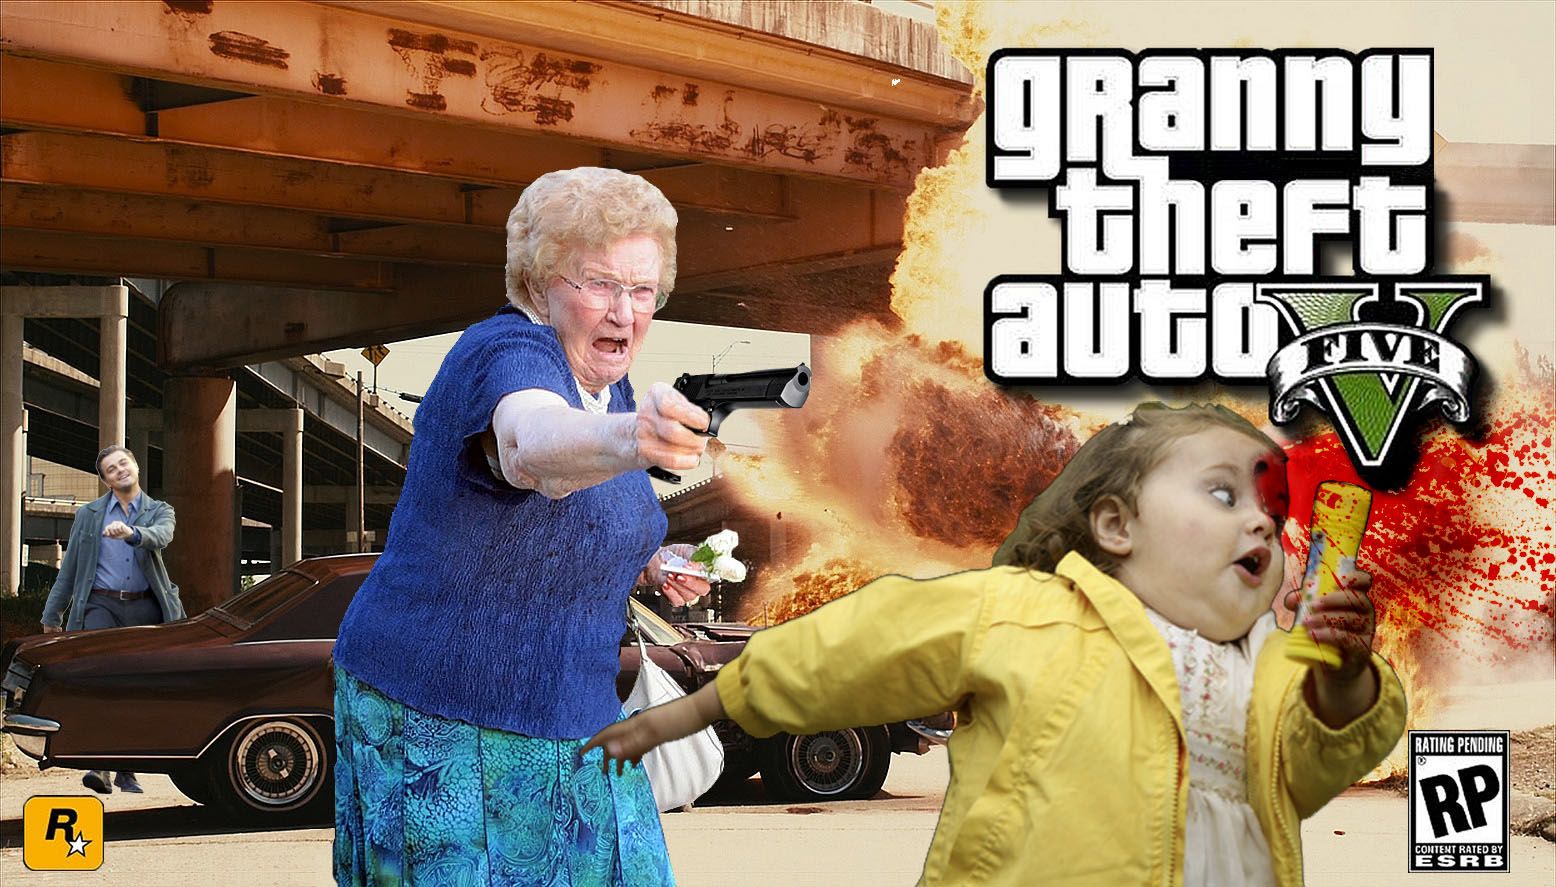 granny auto Vivre Rating Pending Content Rated By Esrb.